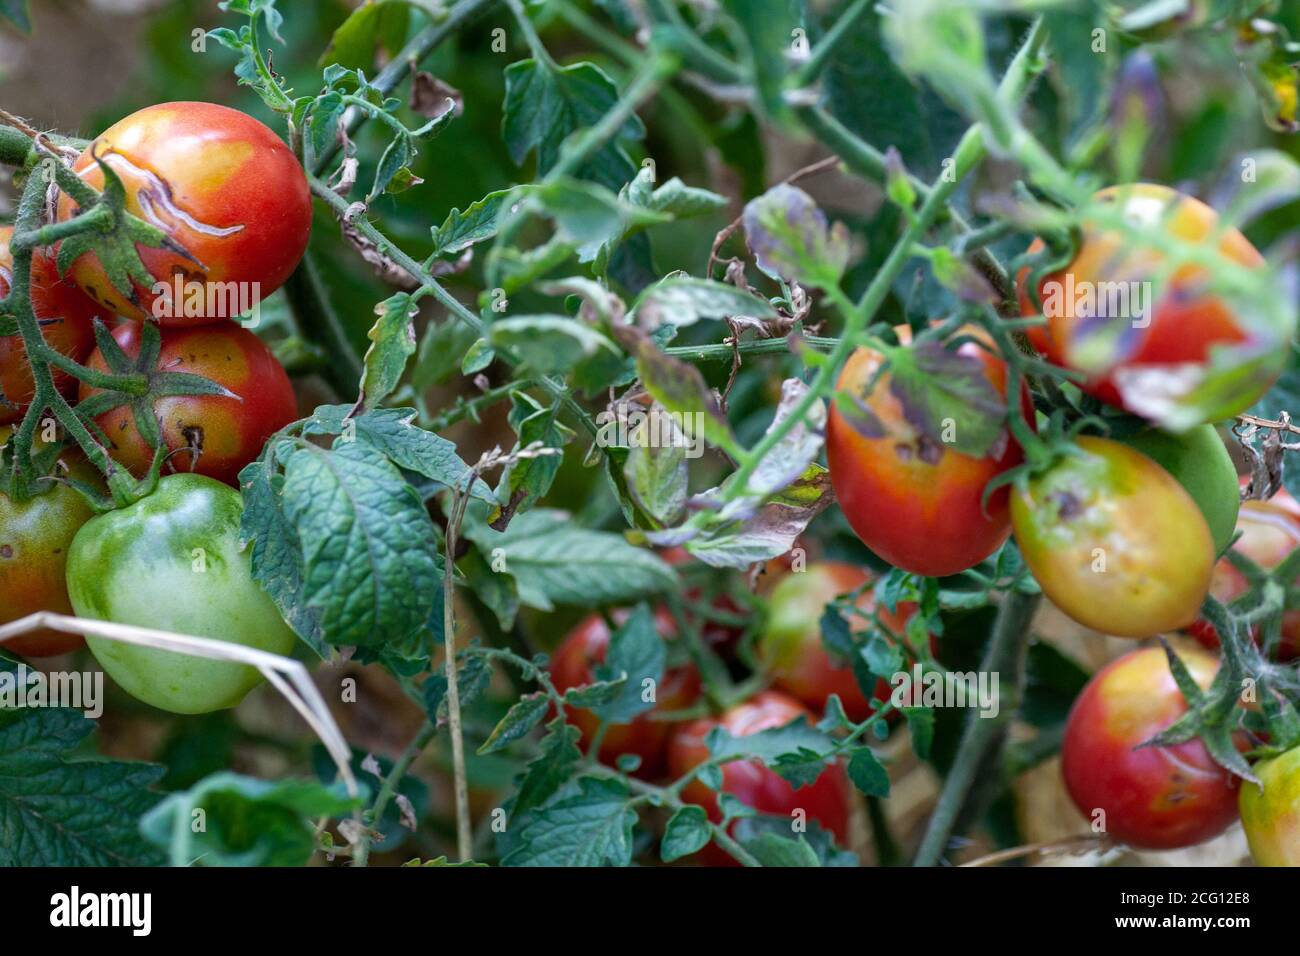 Tomato fruits damaged by bacterial disease. Moisture cracked tomatoes. Tomatoes dried up from pests. Stock Photo